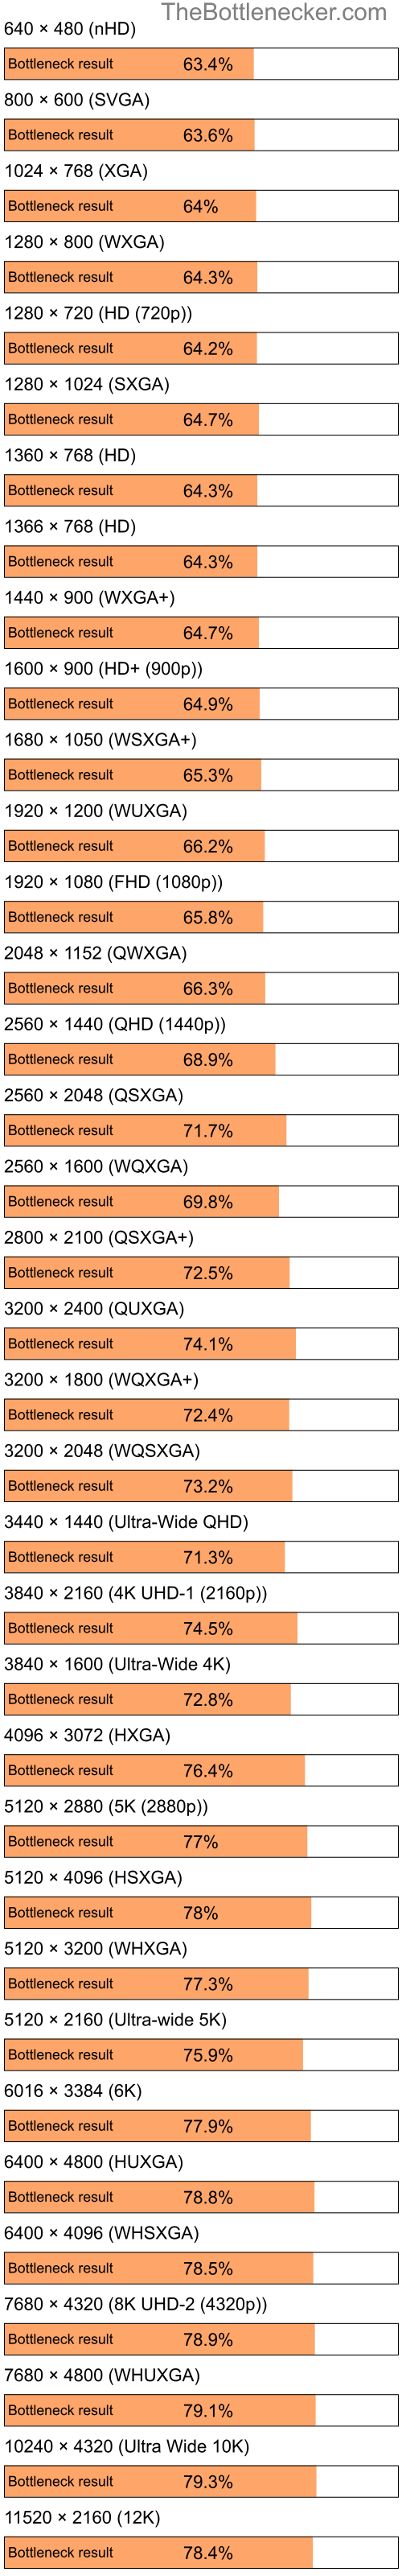 Bottleneck results by resolution for Intel Pentium 4 and AMD Radeon X700 in General Tasks